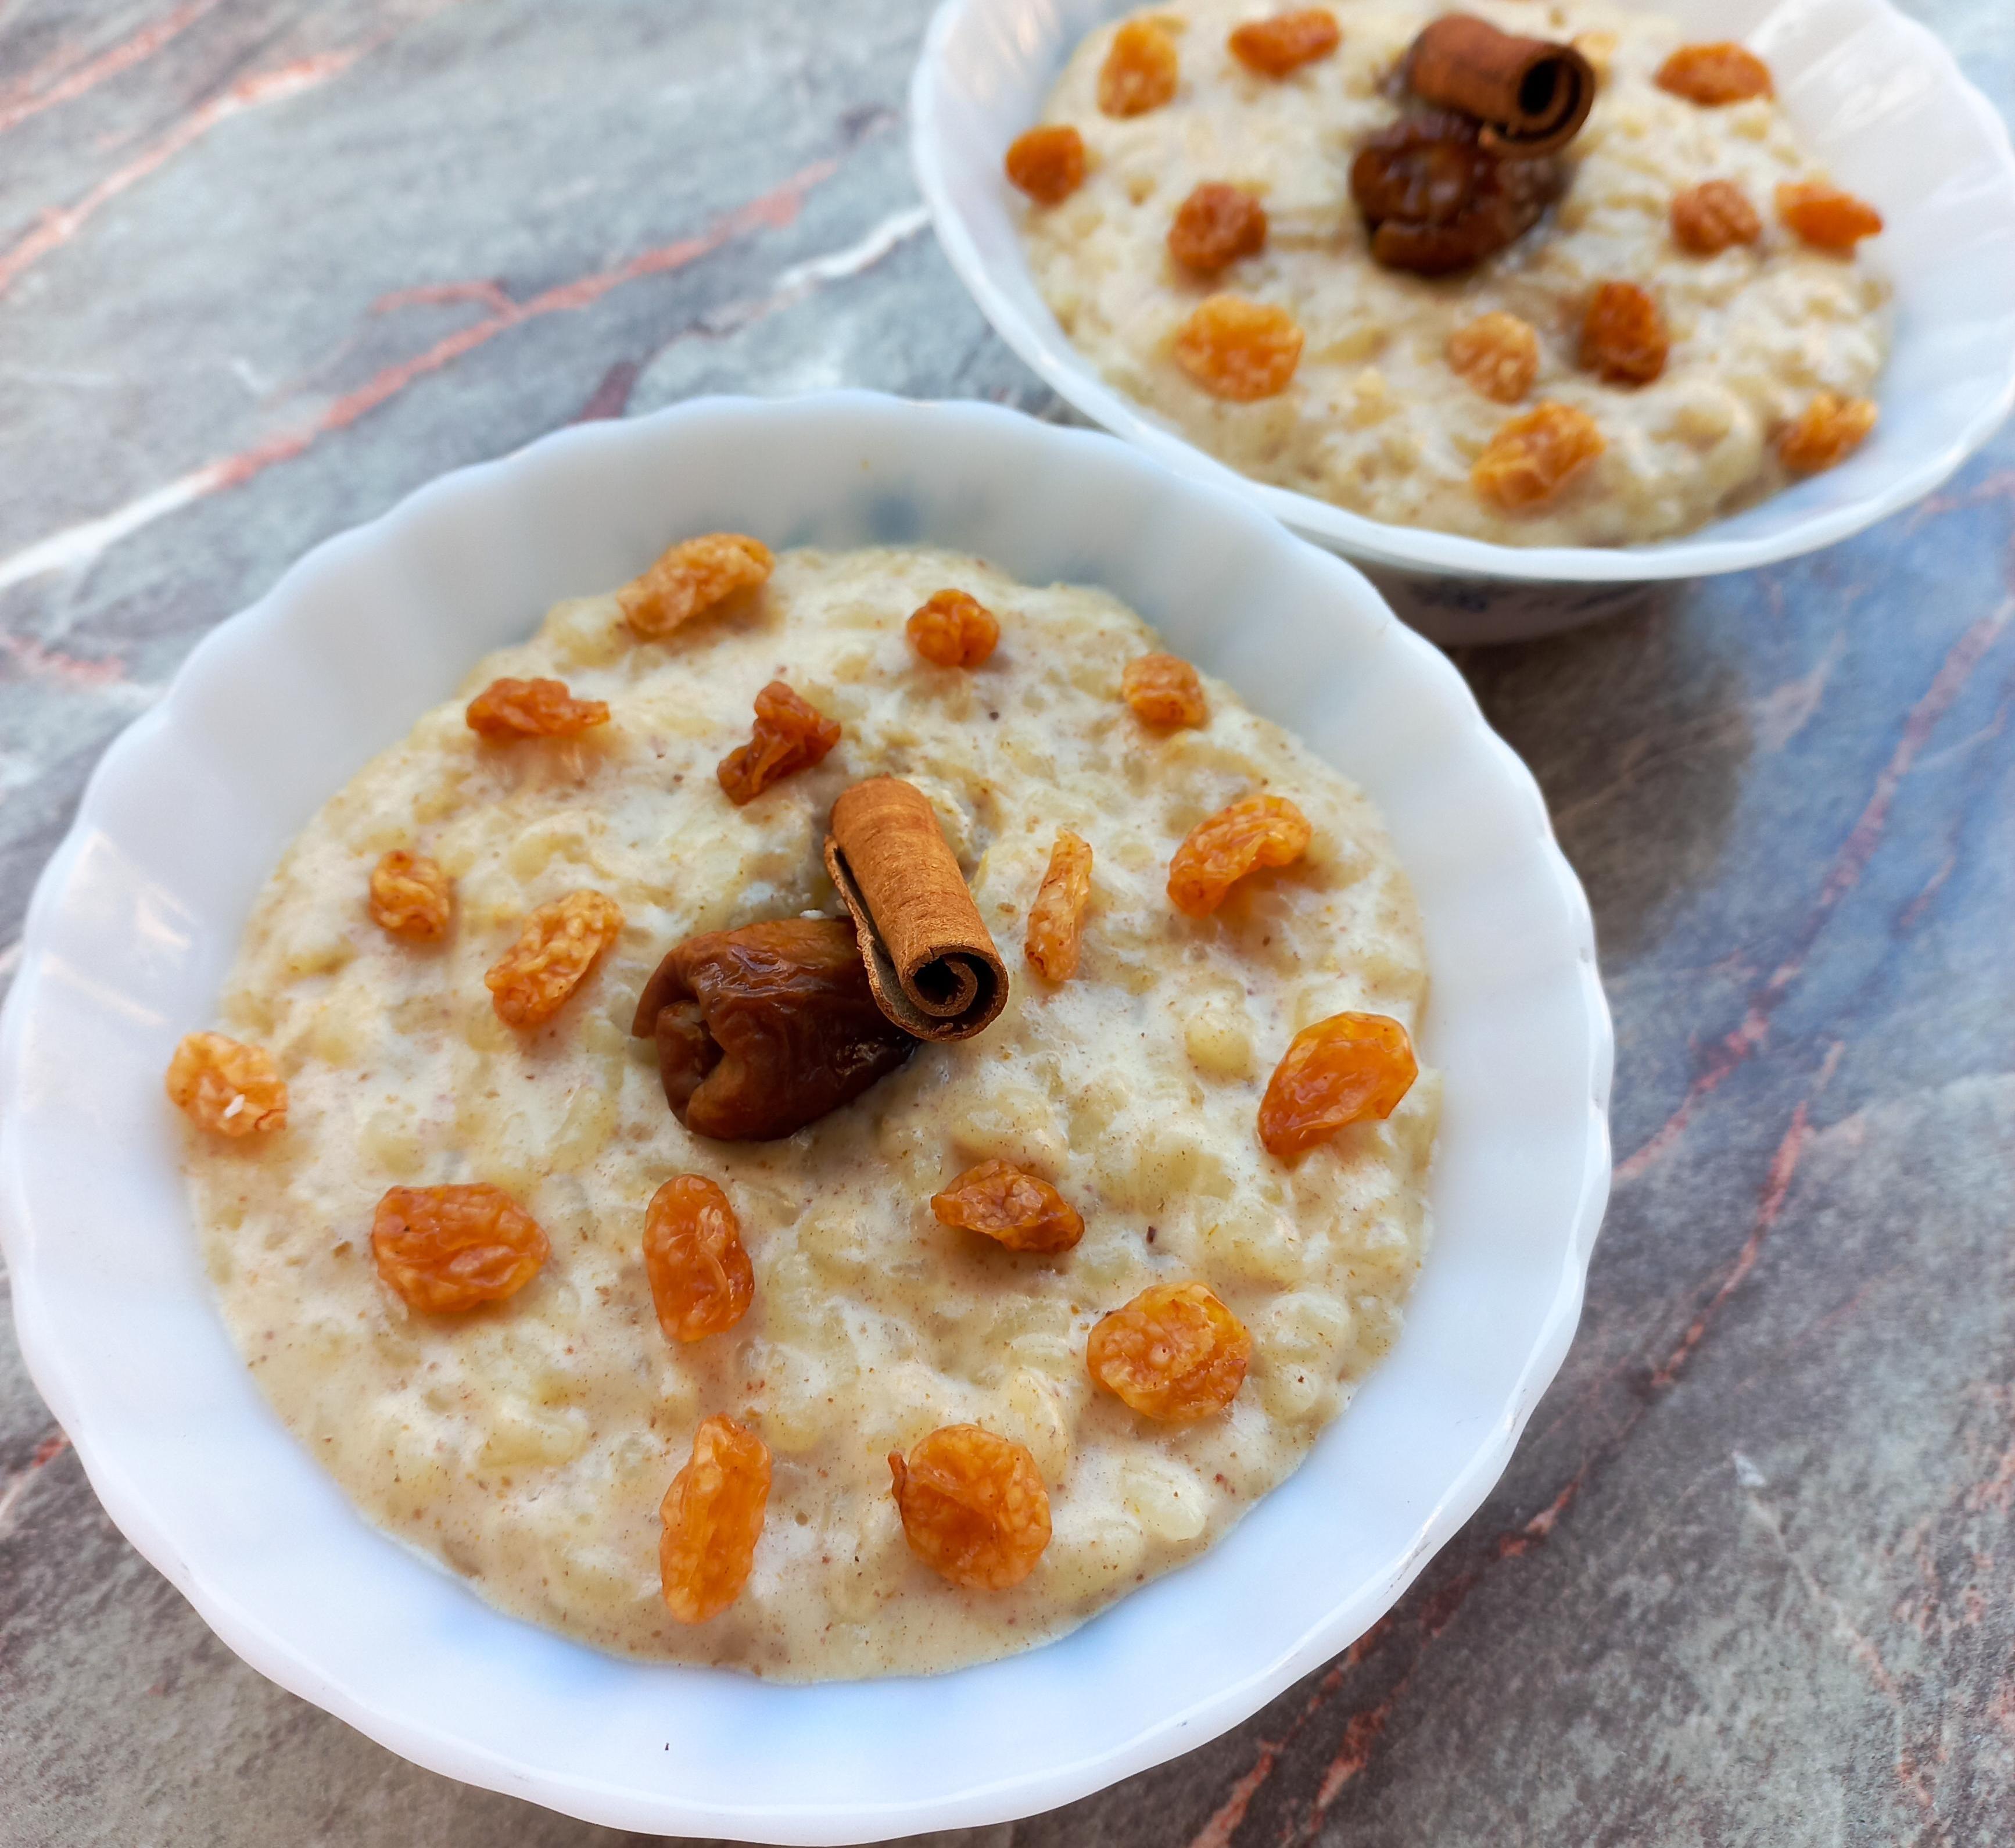 Sugar Free Egyptian Rice Pudding With Date and Cinnamon ( Roz Bel Laban)